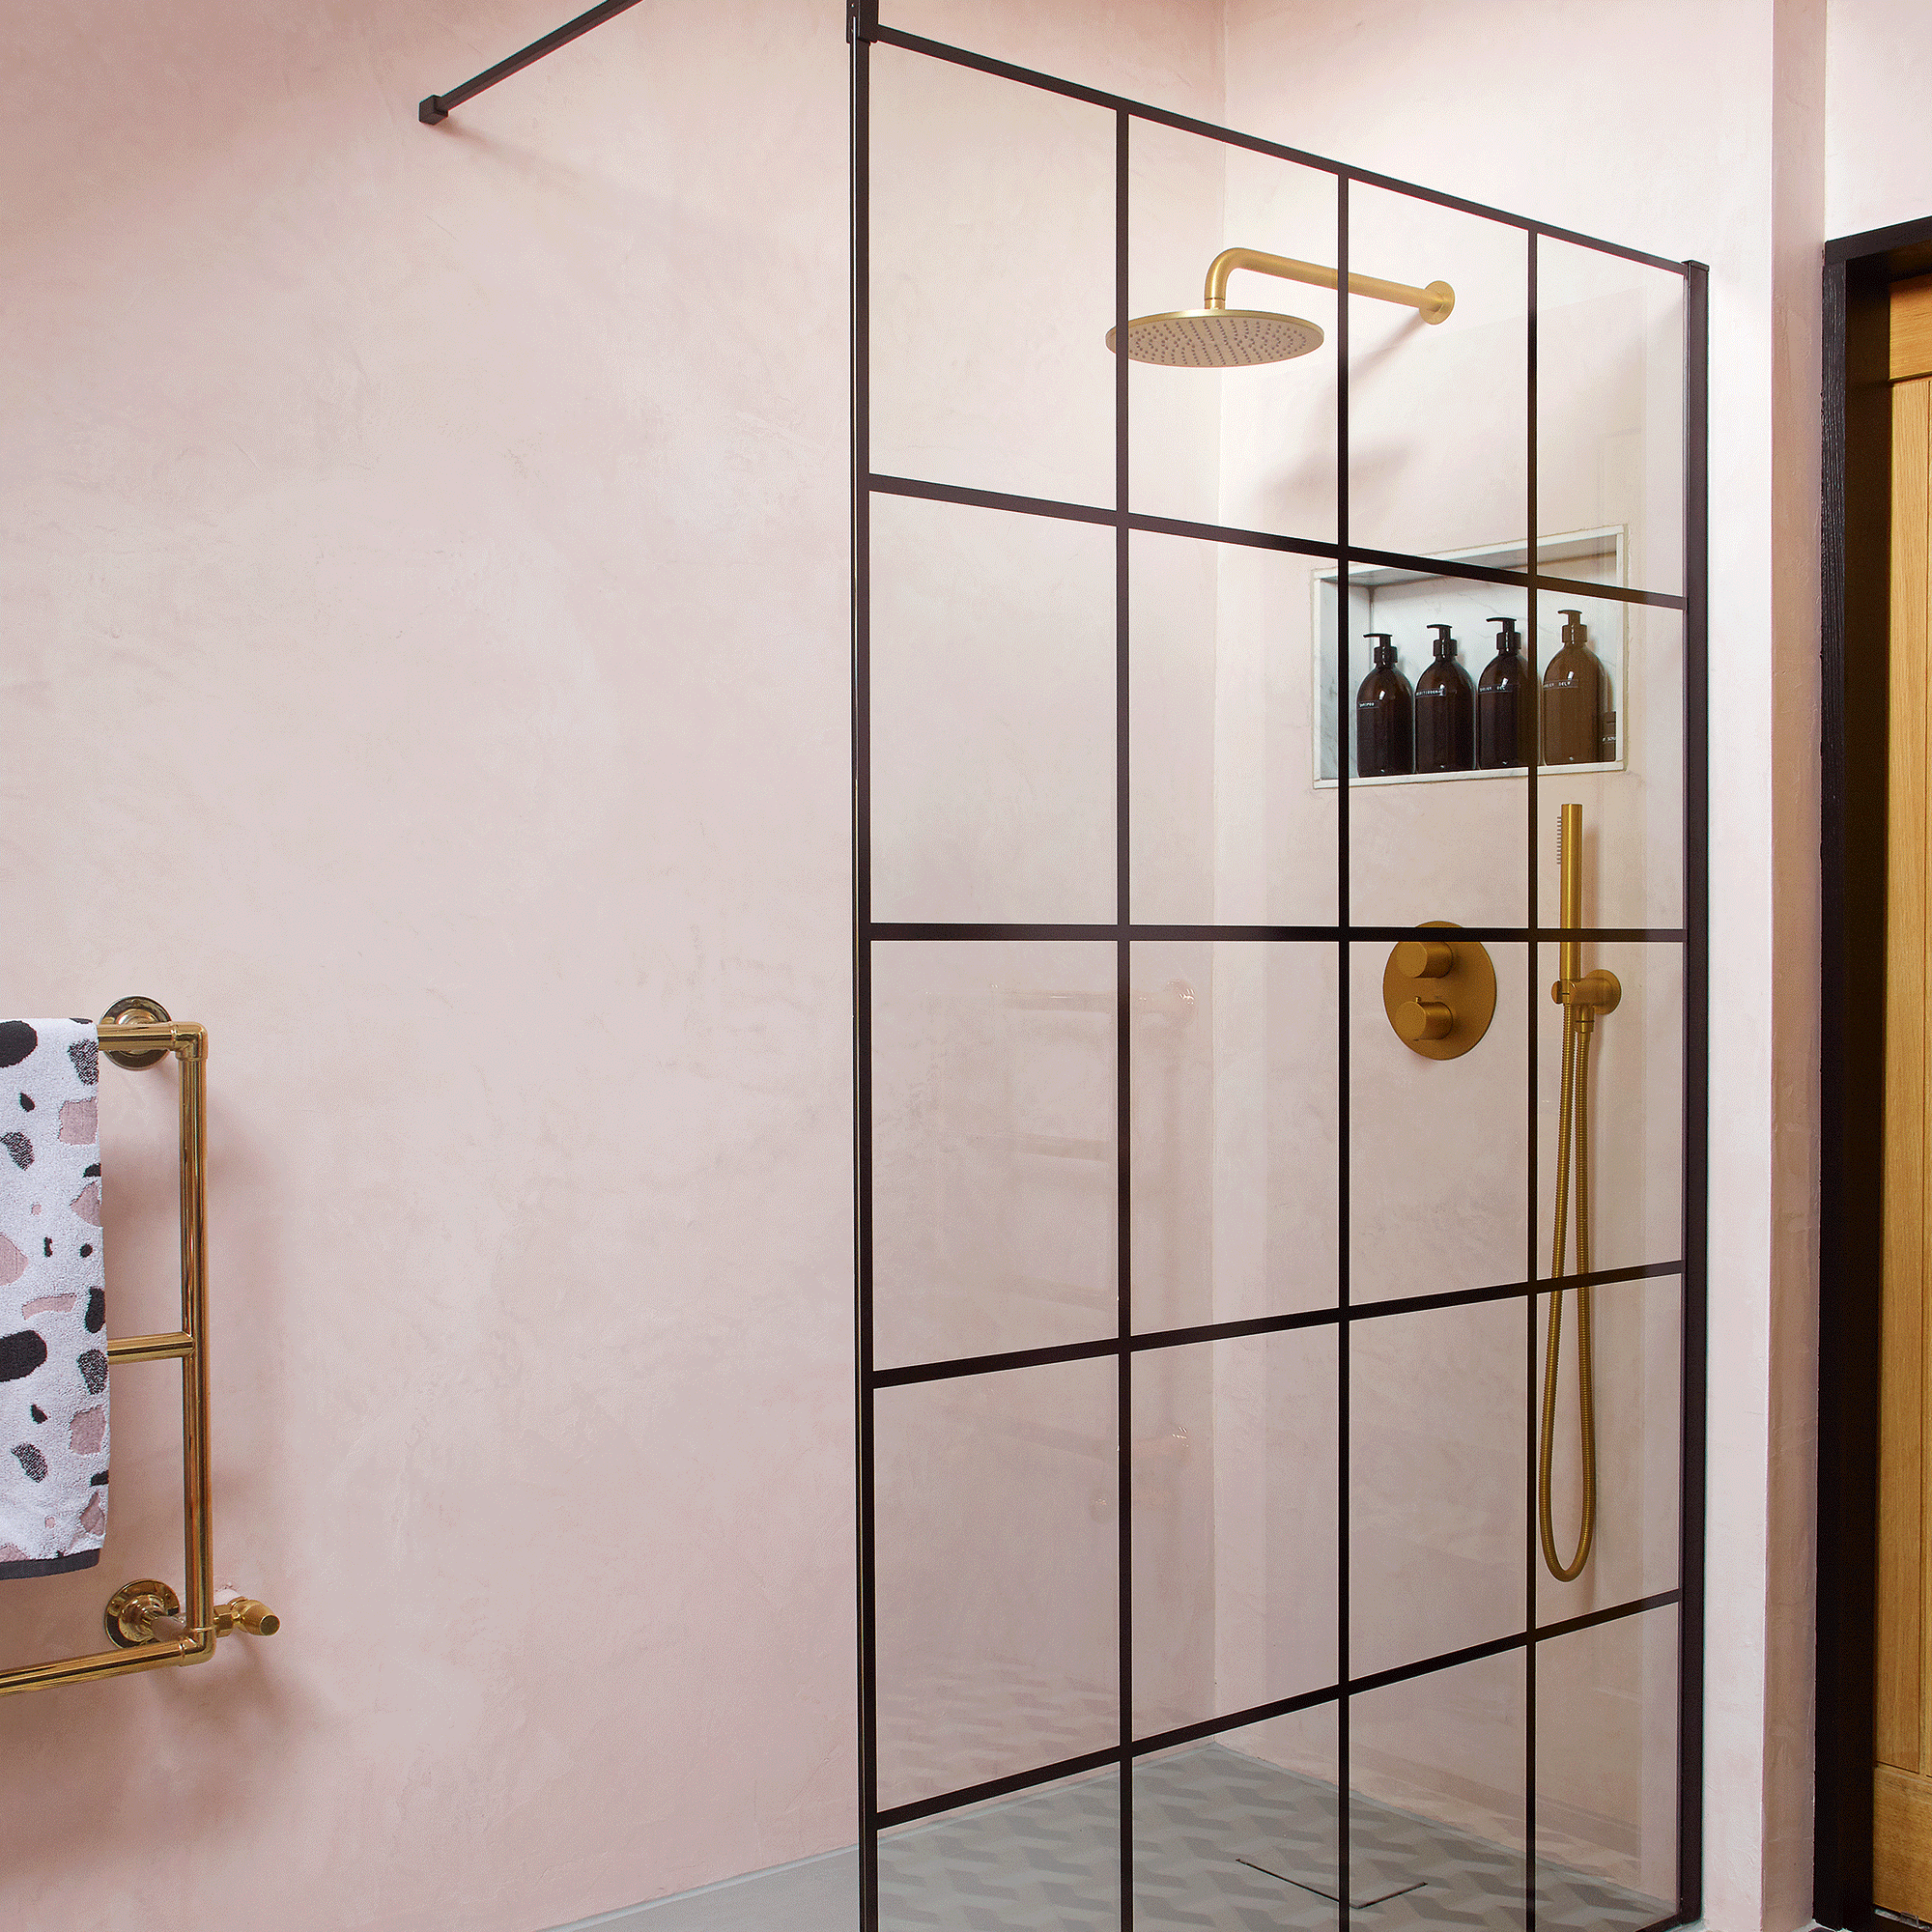 Pink tiled bathroom with crittal shower screen